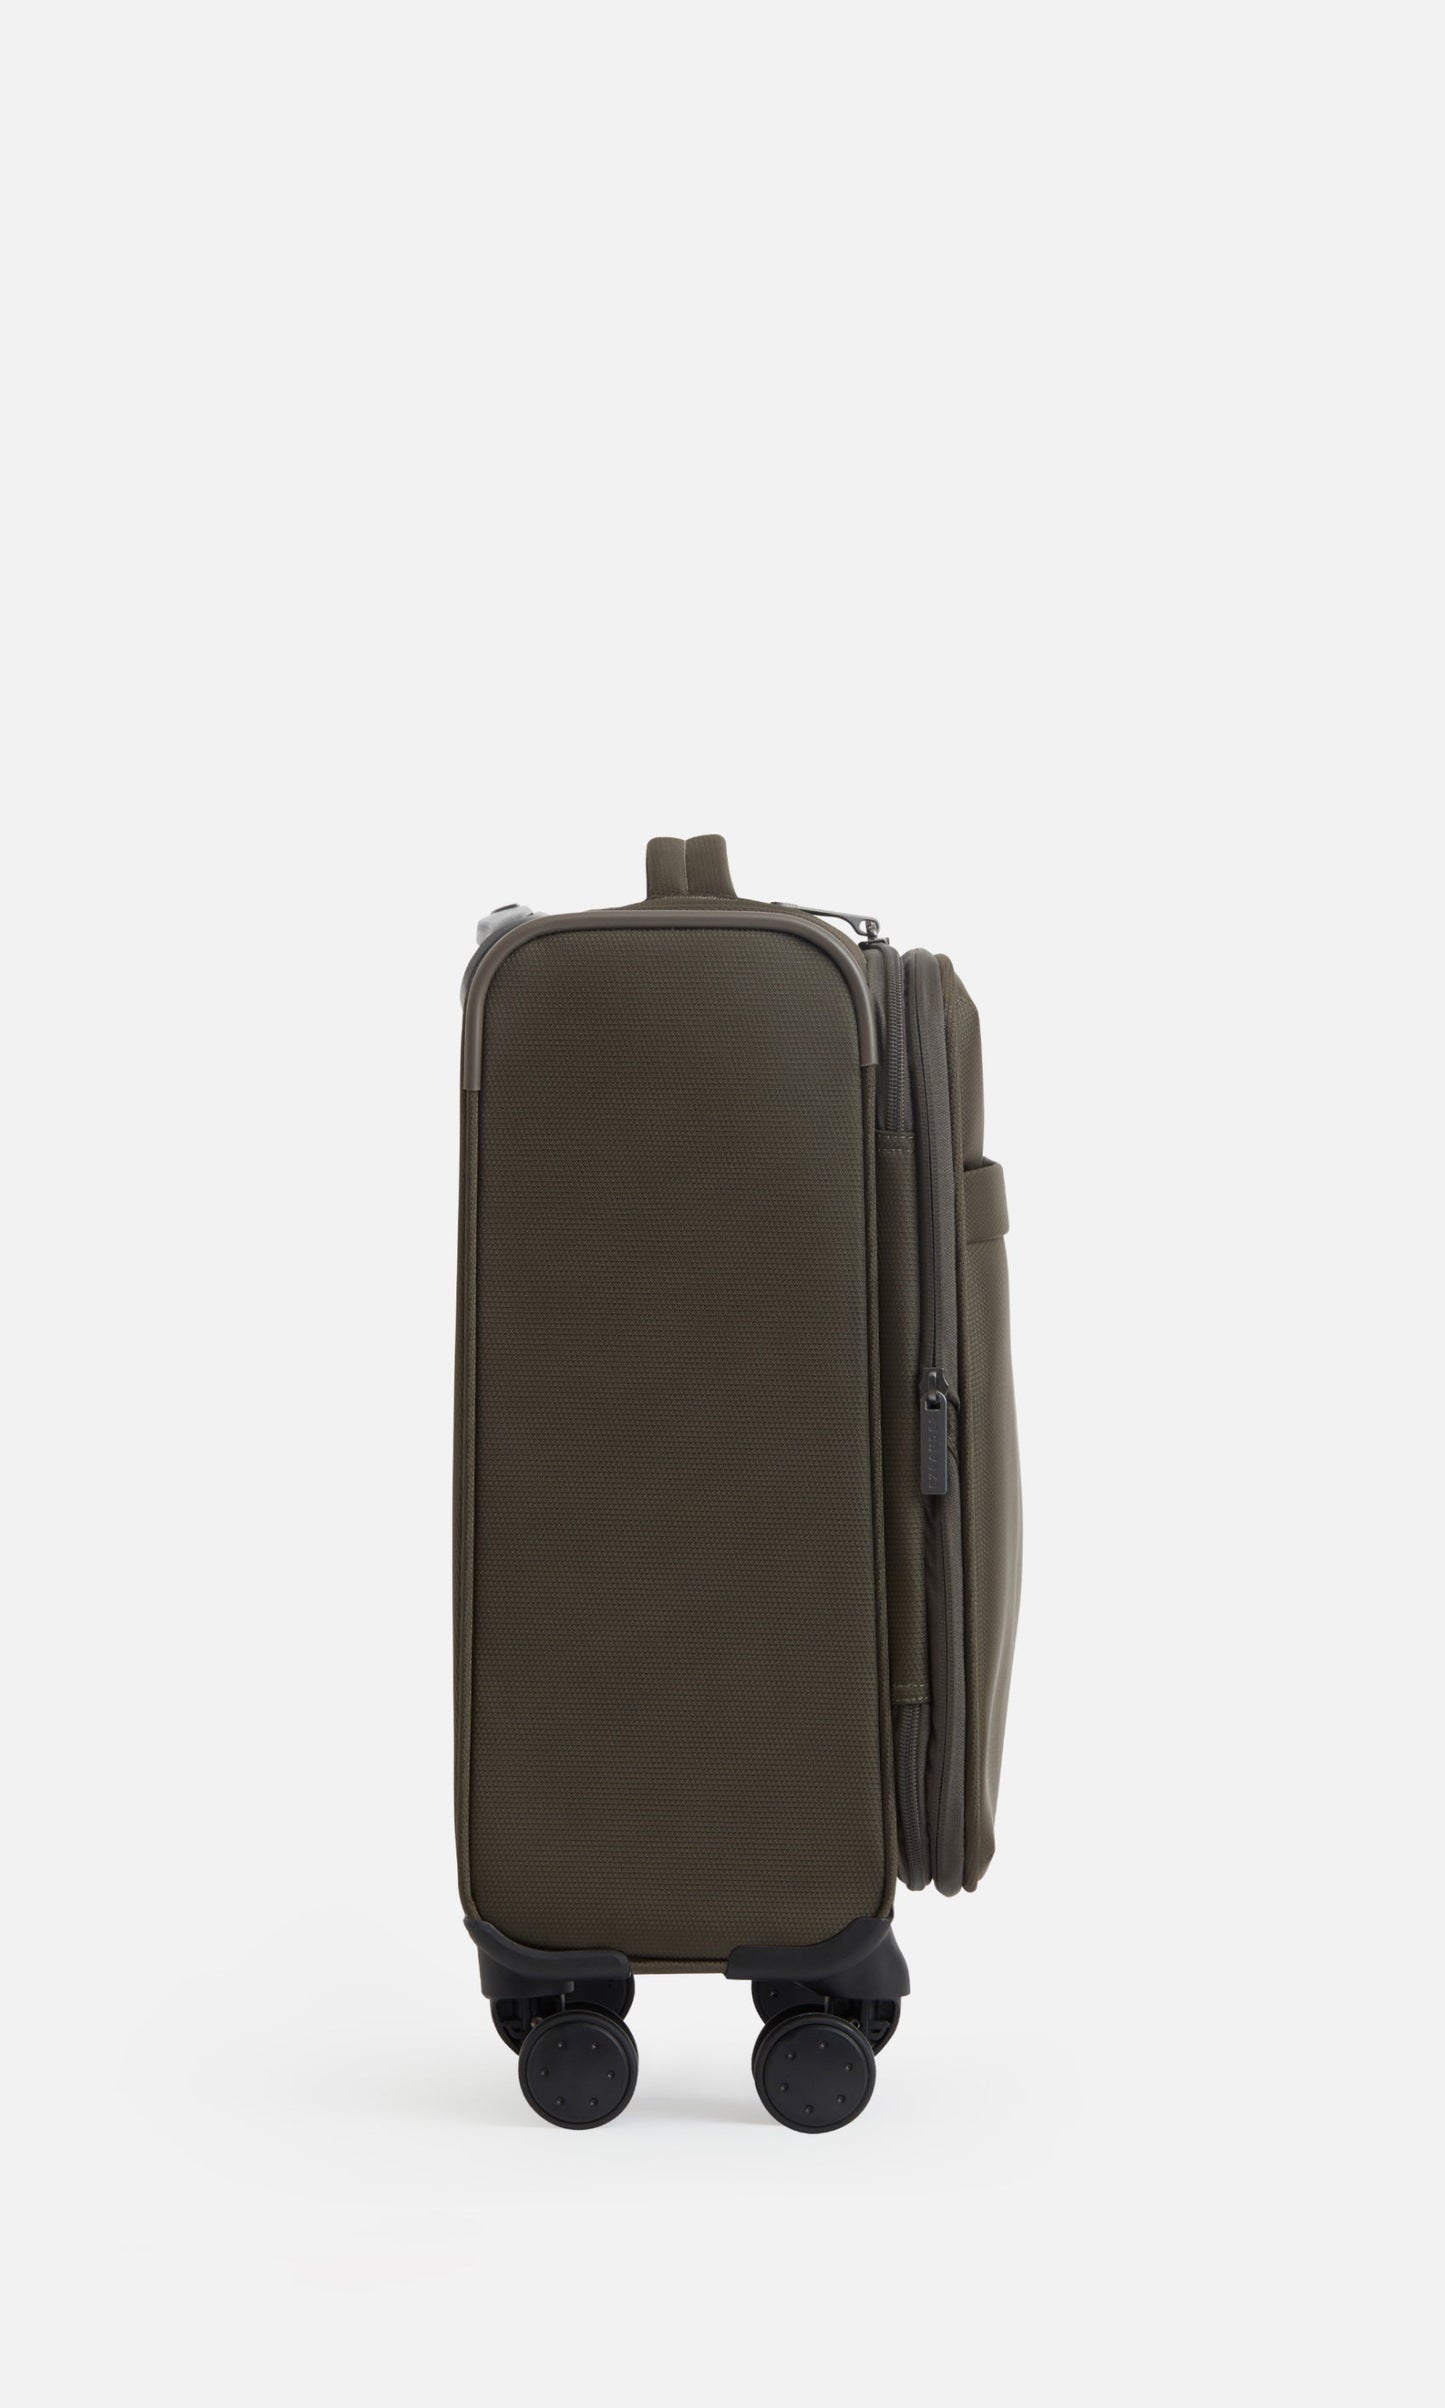 Antler Luggage -  Prestwick cabin in khaki - Soft Suitcases Prestwick Cabin Suitcase Khaki (Green) | Soft Shell Suitcase | Antler 